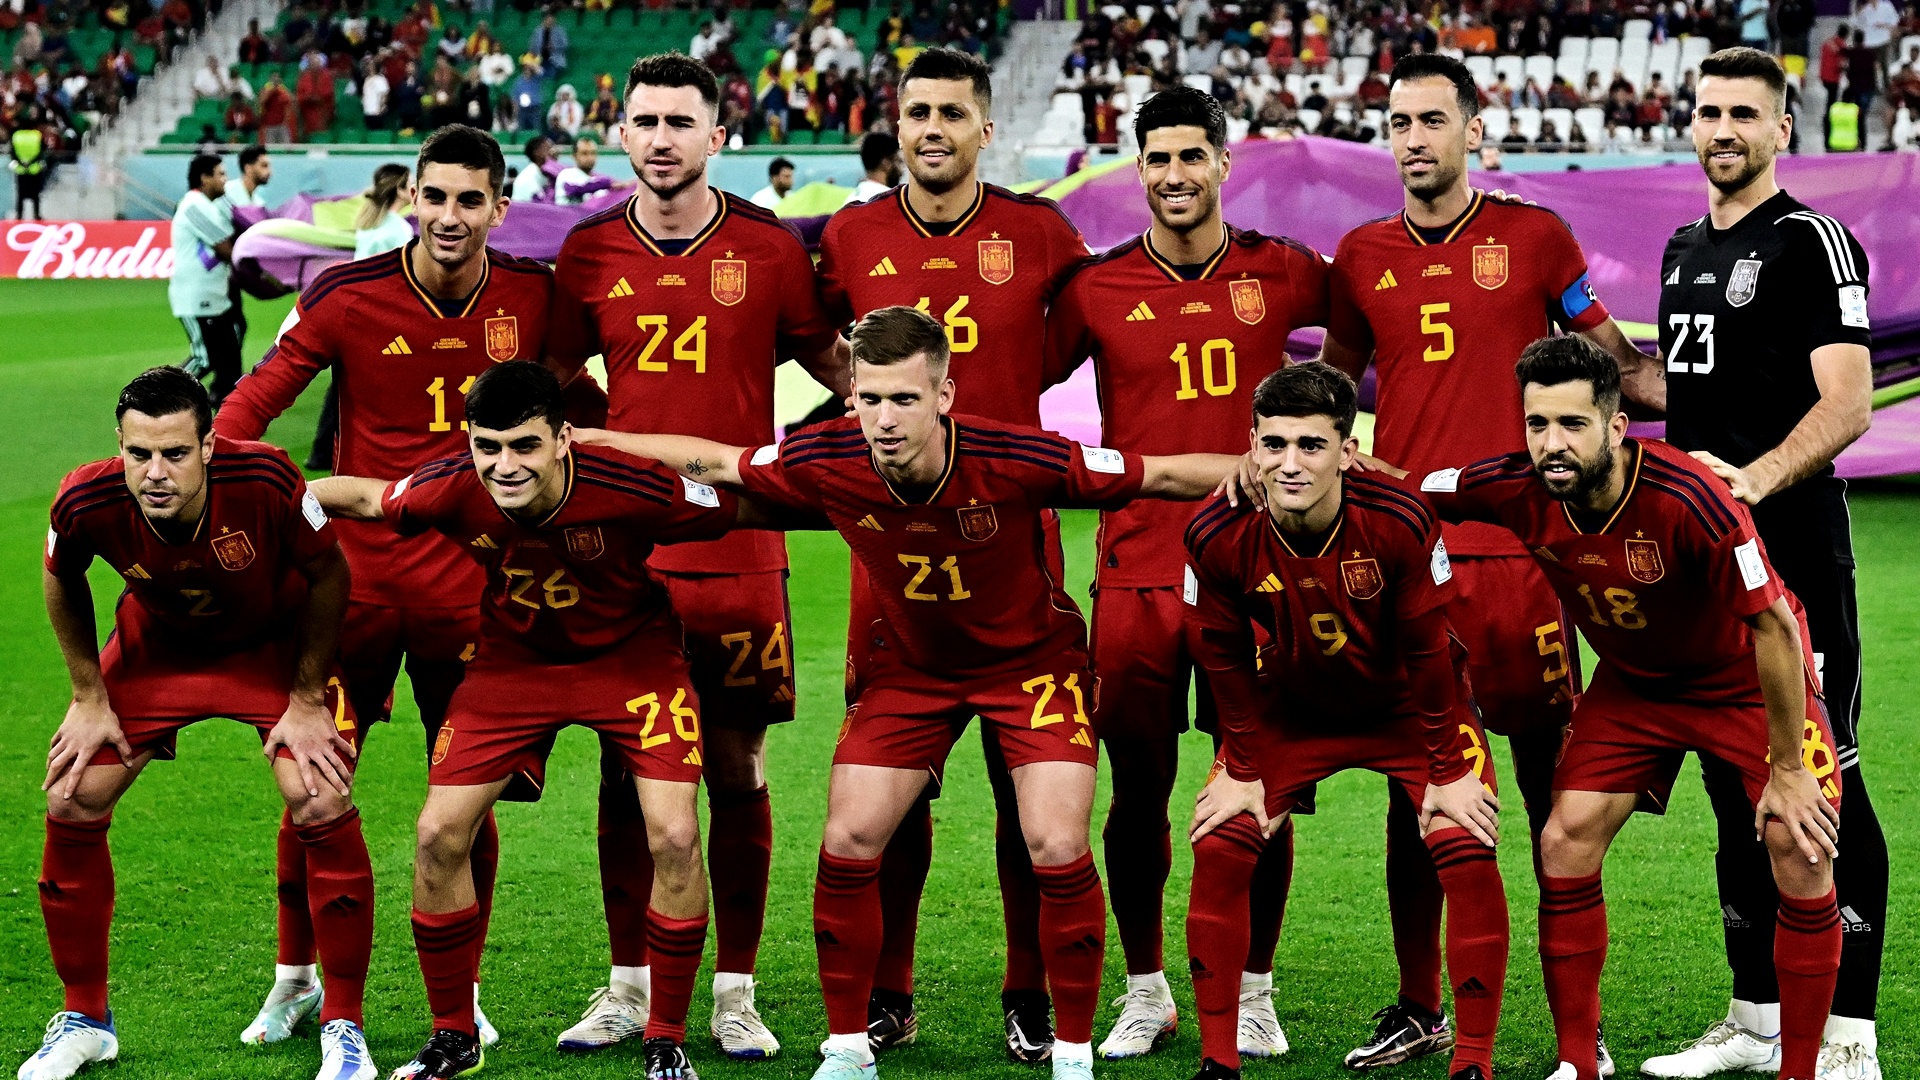 20221124_Spain_Players_World Cup